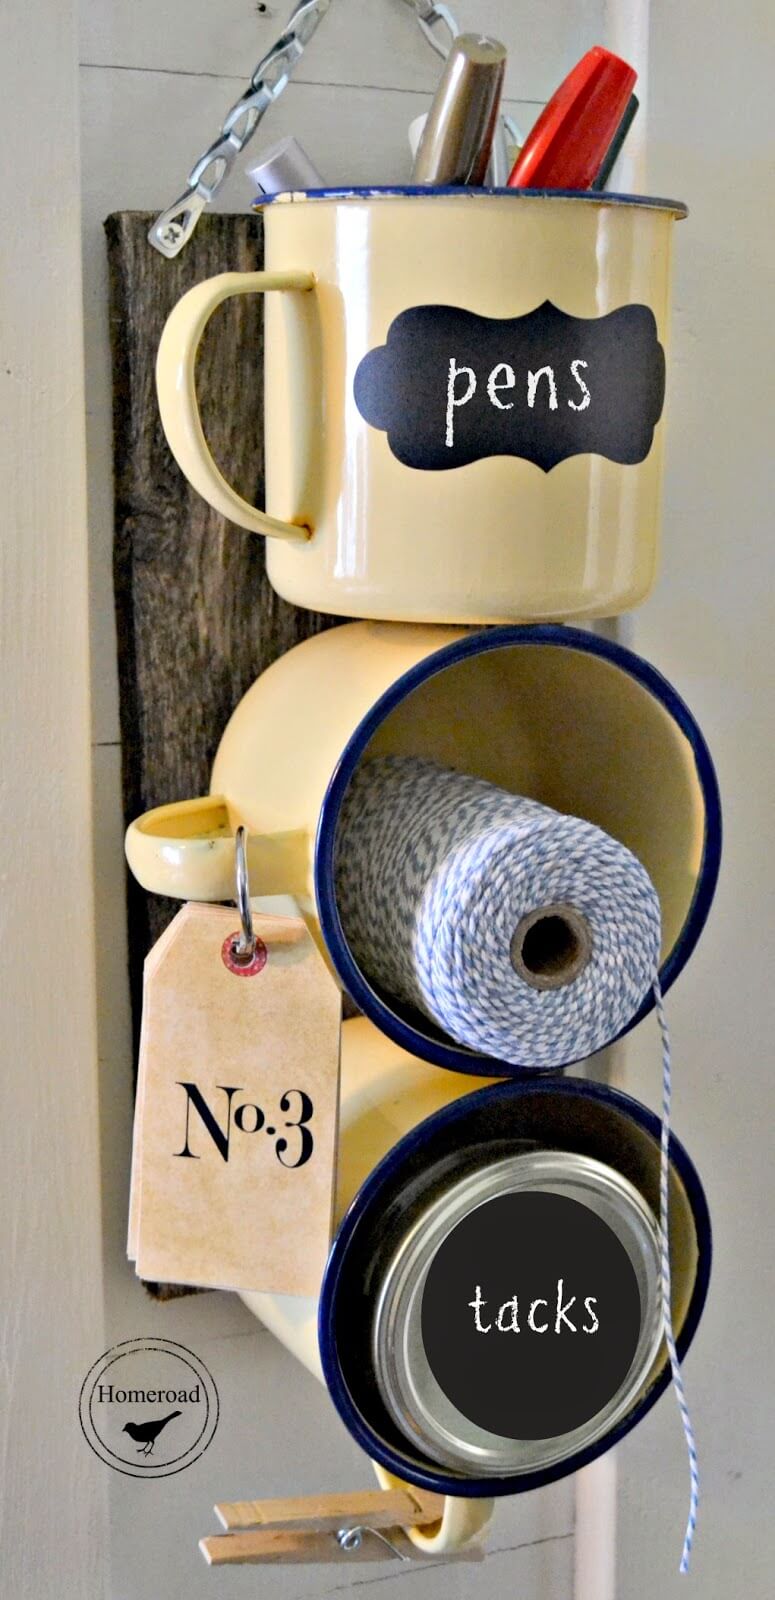 32 brilliant ideas to repurpose your used kitchen items - 255